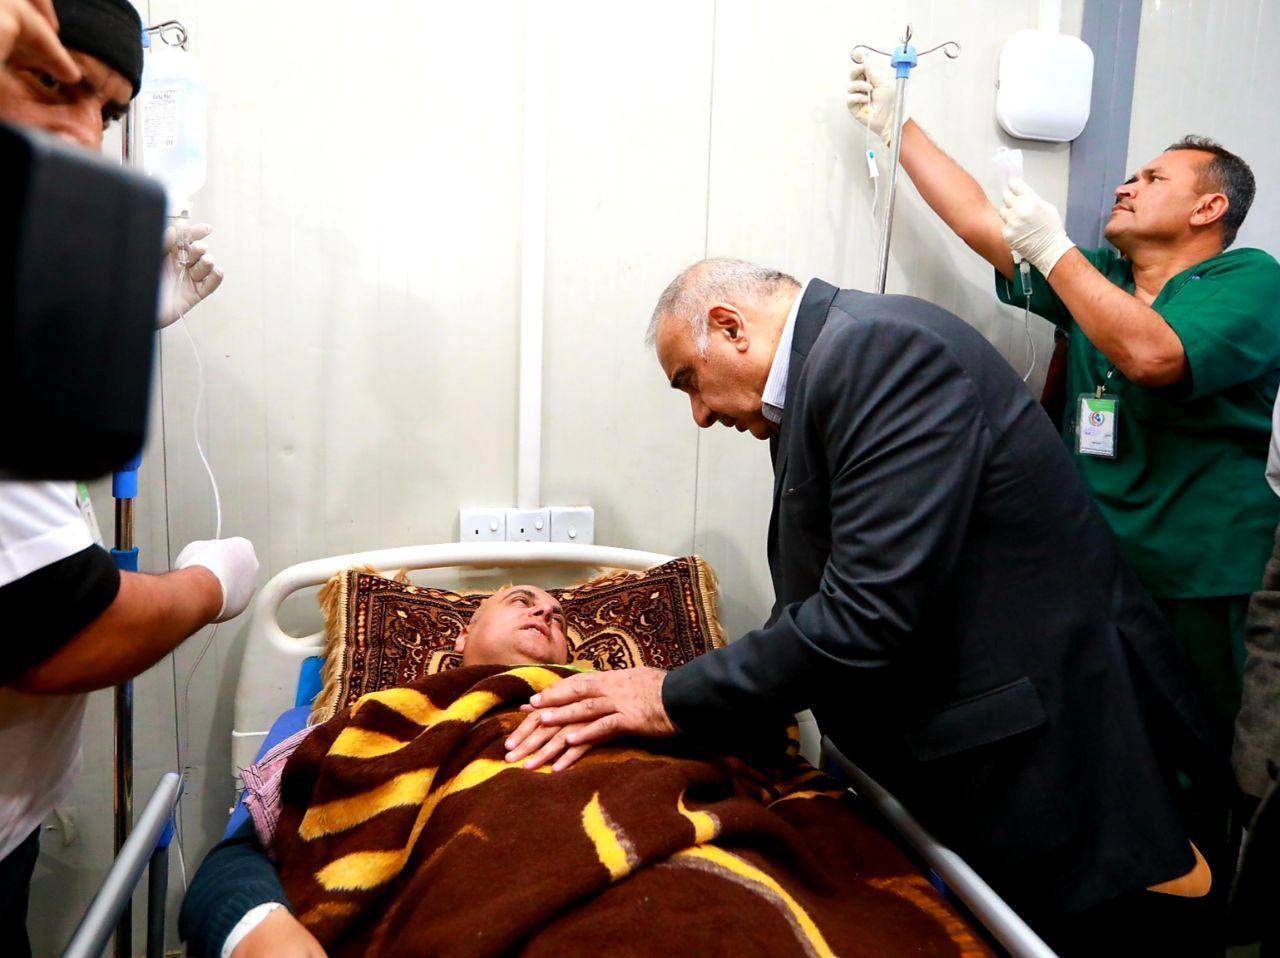 Iraq's Prime Minister Adel Abdul Mahdi visits the people injured after a ferry sank in the Tigris river, at Salam hospital in Mosul, Iraq March 21, 2019. 